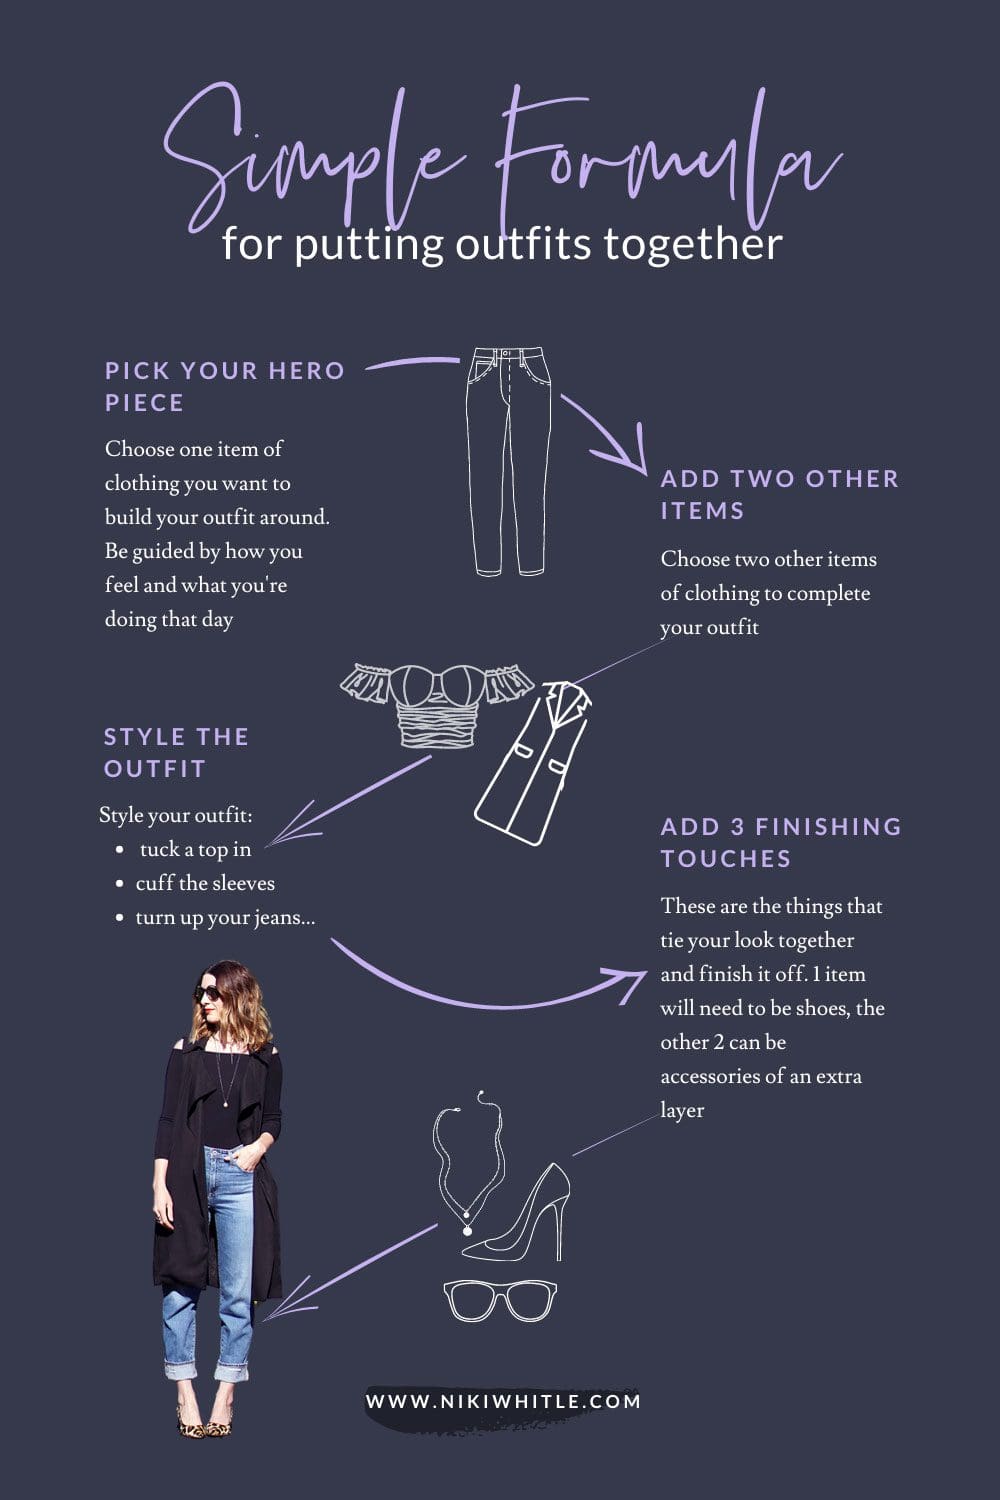 A simple formula for putting together an outfit